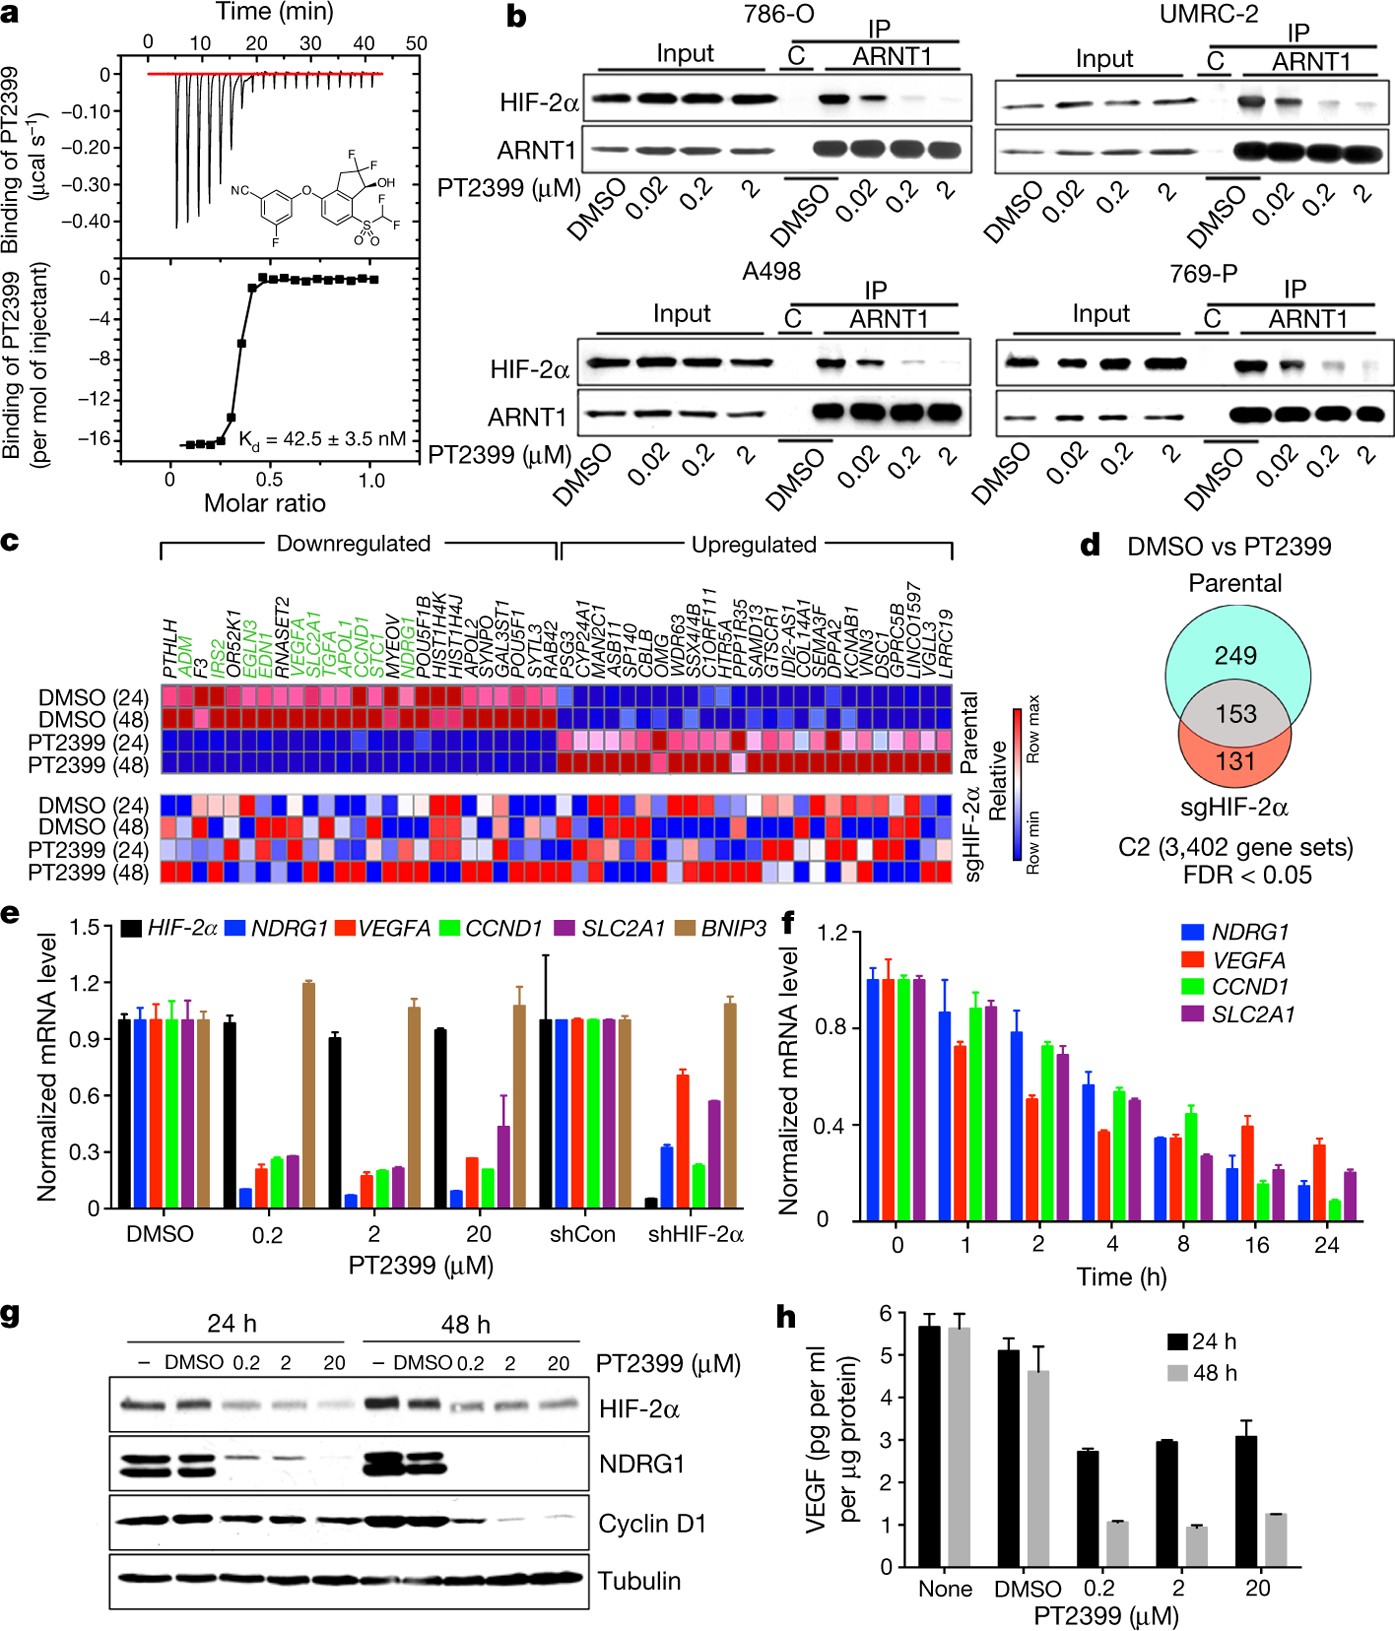 On-target efficacy of a HIF-2α antagonist in preclinical cancer models |